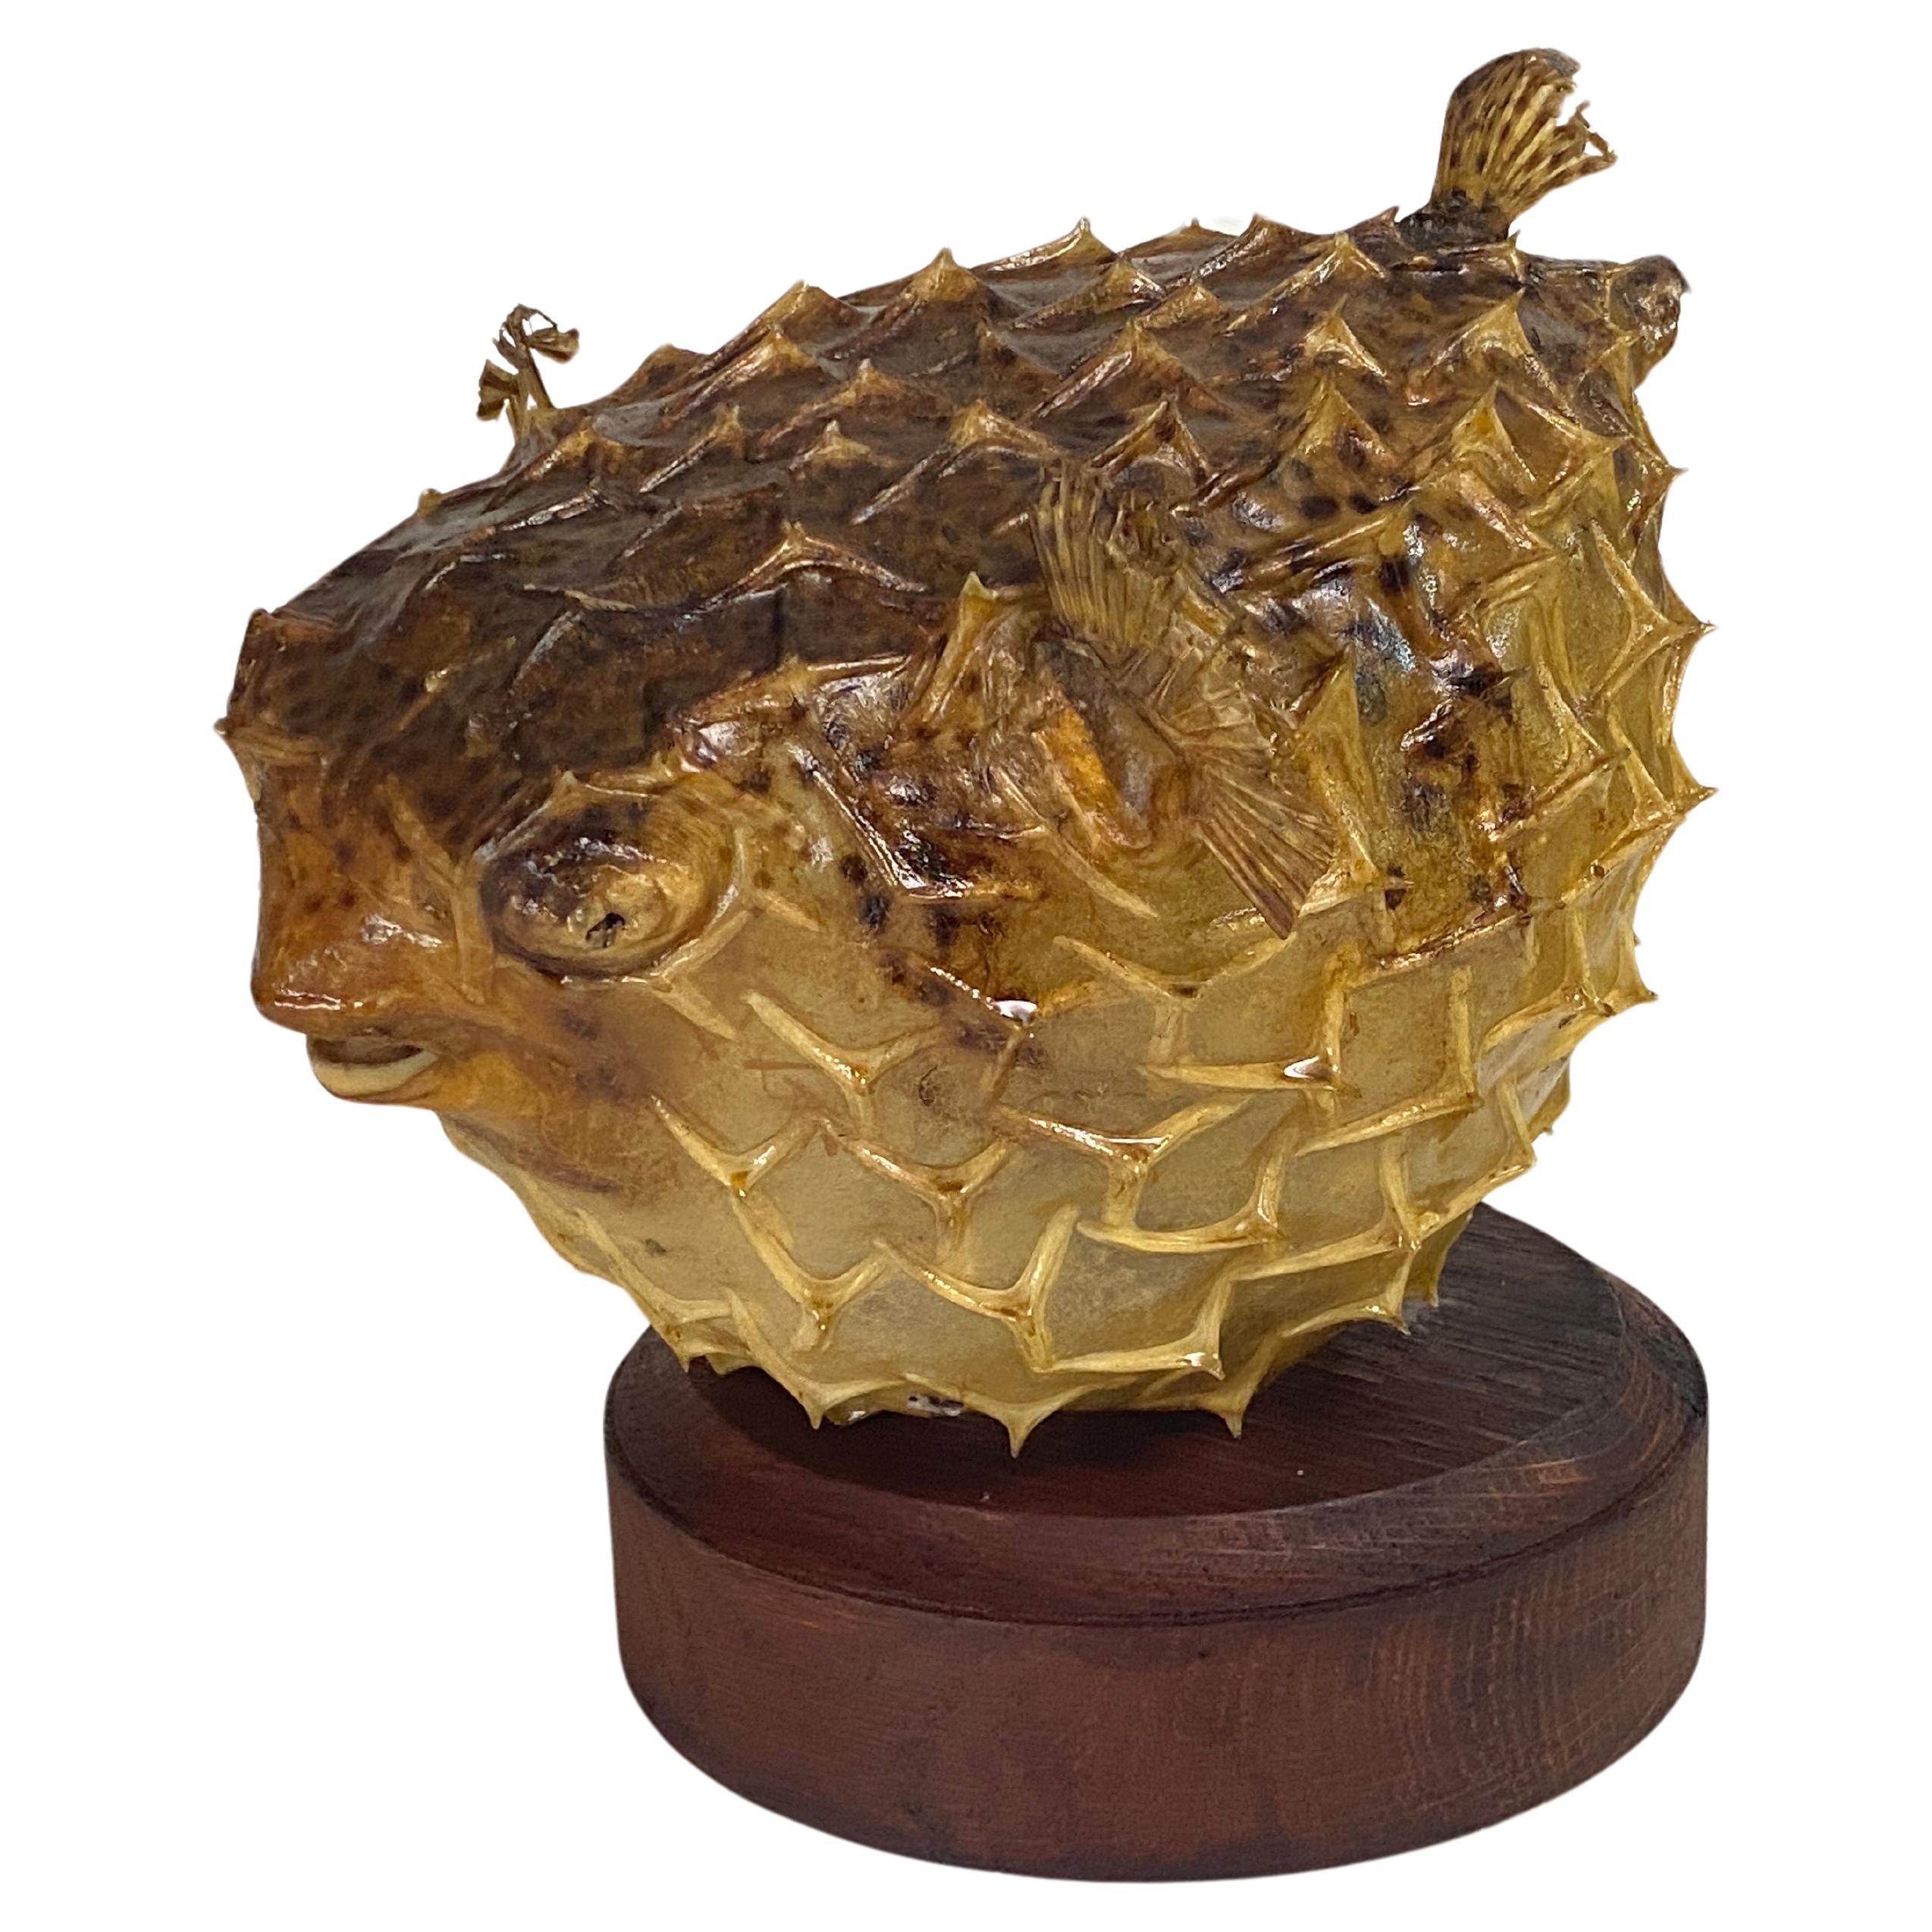 Beautiful mood light featuring a rare and unusual antique marine natural taxidermy specimen of a porcupine fish. It belongs to the family Diodontidae, order Tetraodontiformes, and is often called a pufferfish. It is closely related to the adorable